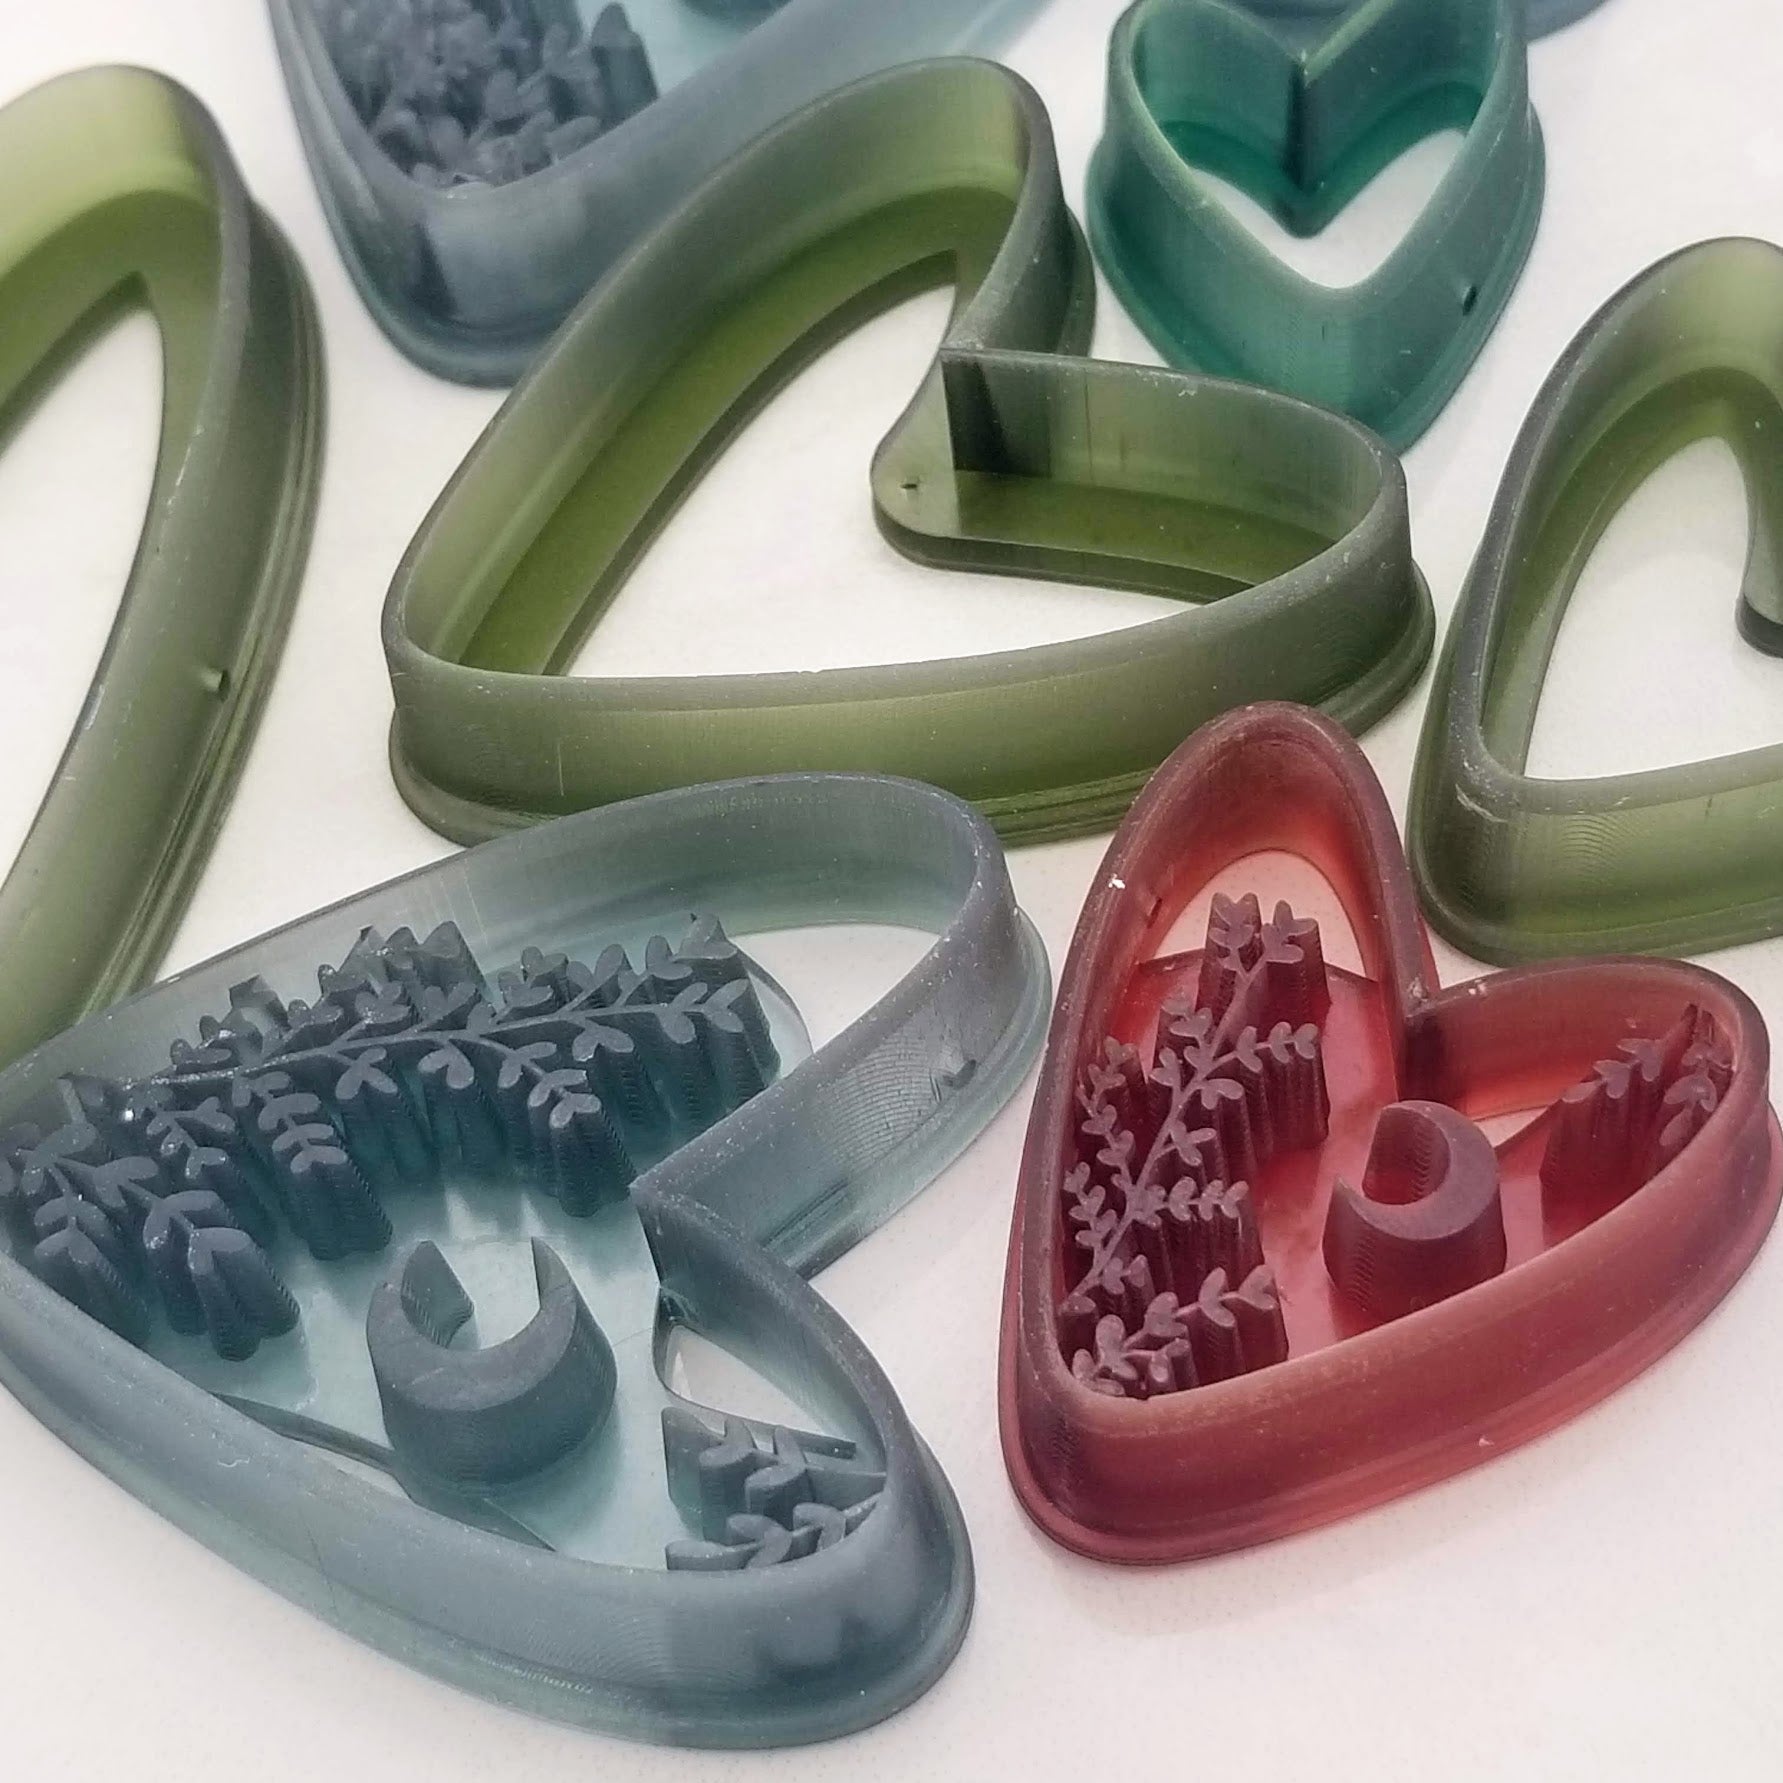 3D Printed Boho Heart sharp edged clay cutters, zoomed in close up shot to show details